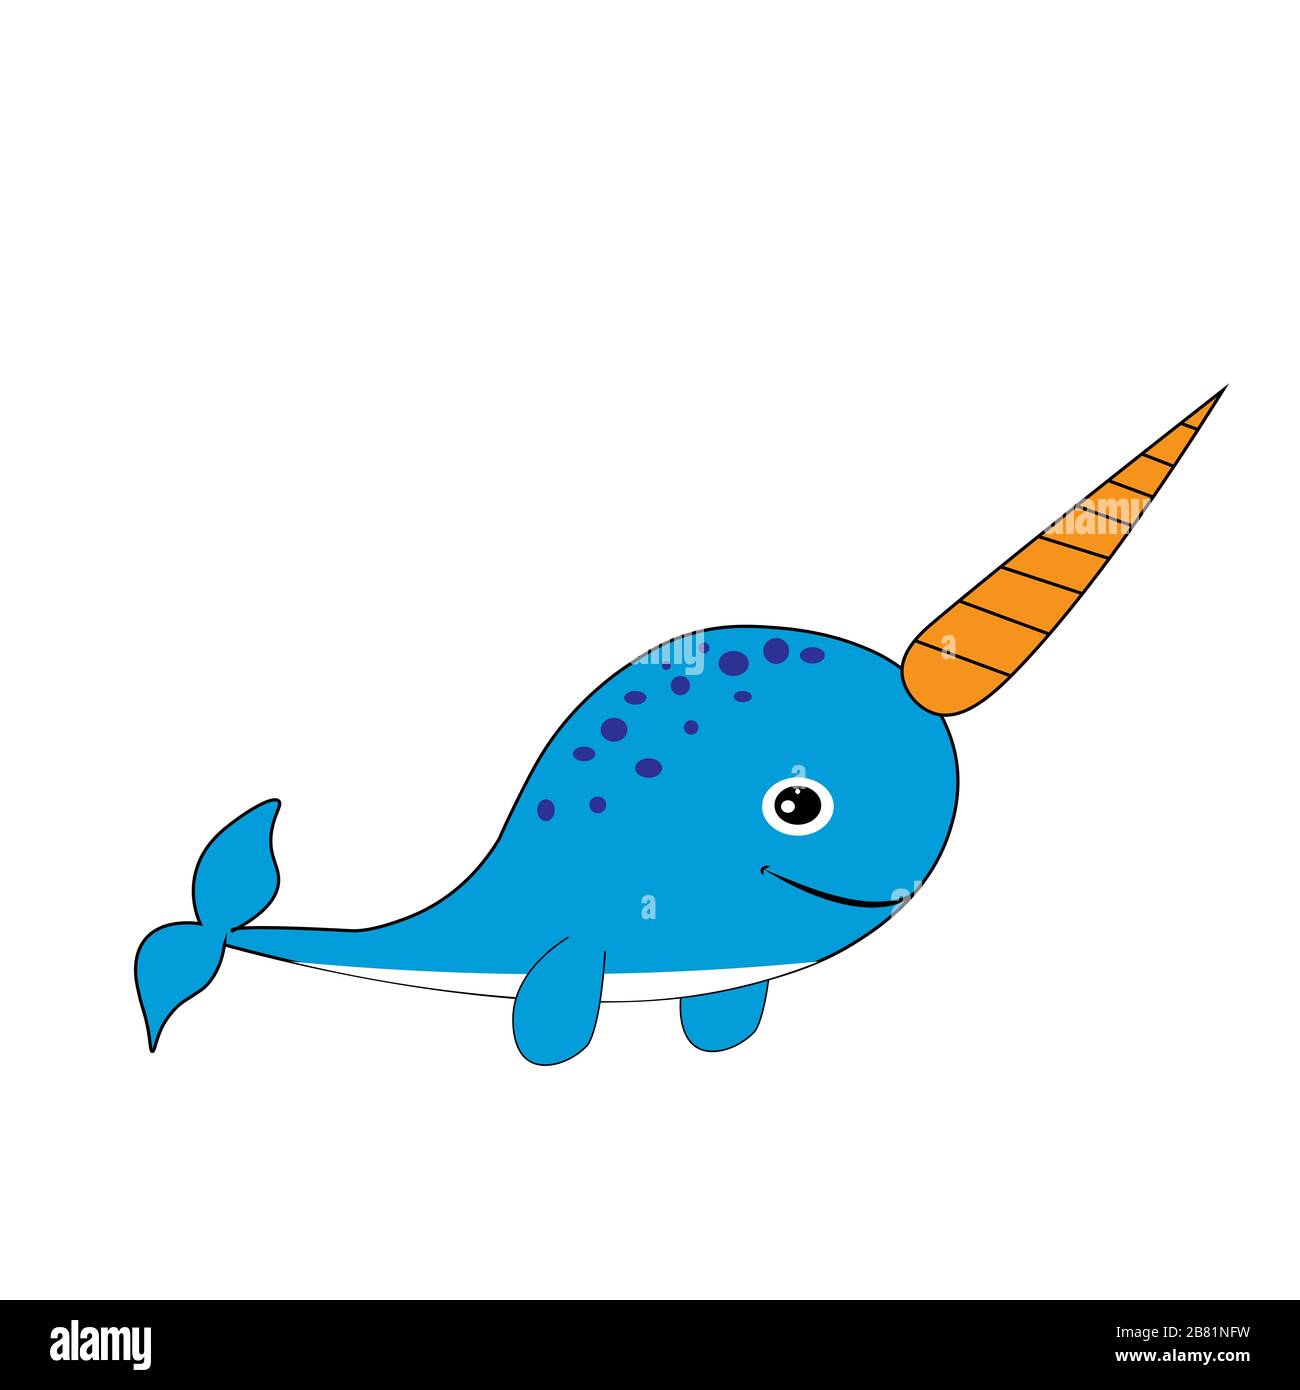 cute narwhal cartoon illustration vector poster Stock Photo